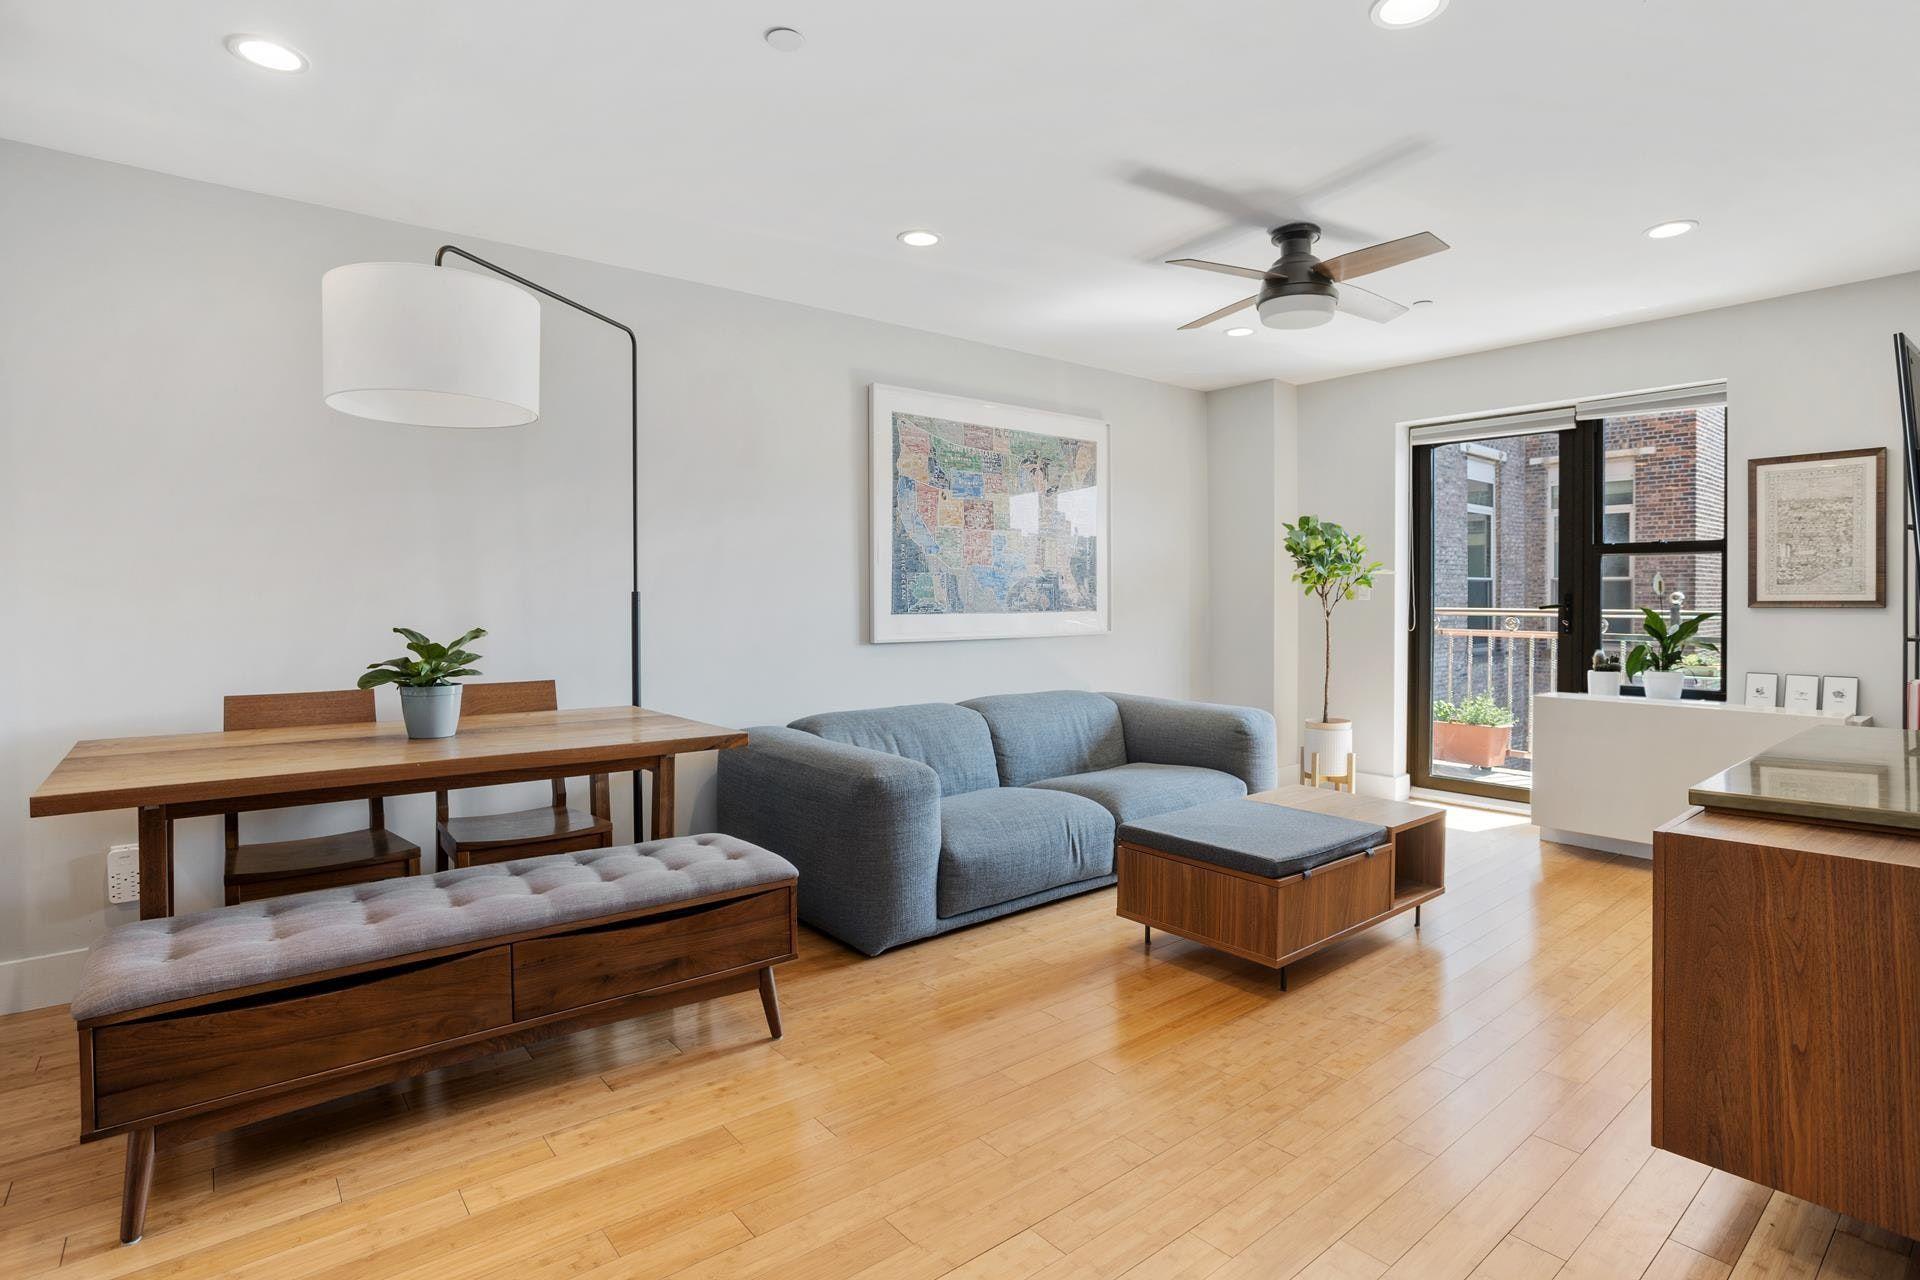 234 West 148th Street 6A, Central Harlem, Upper Manhattan, NYC - 2 Bedrooms  
2 Bathrooms  
4 Rooms - 